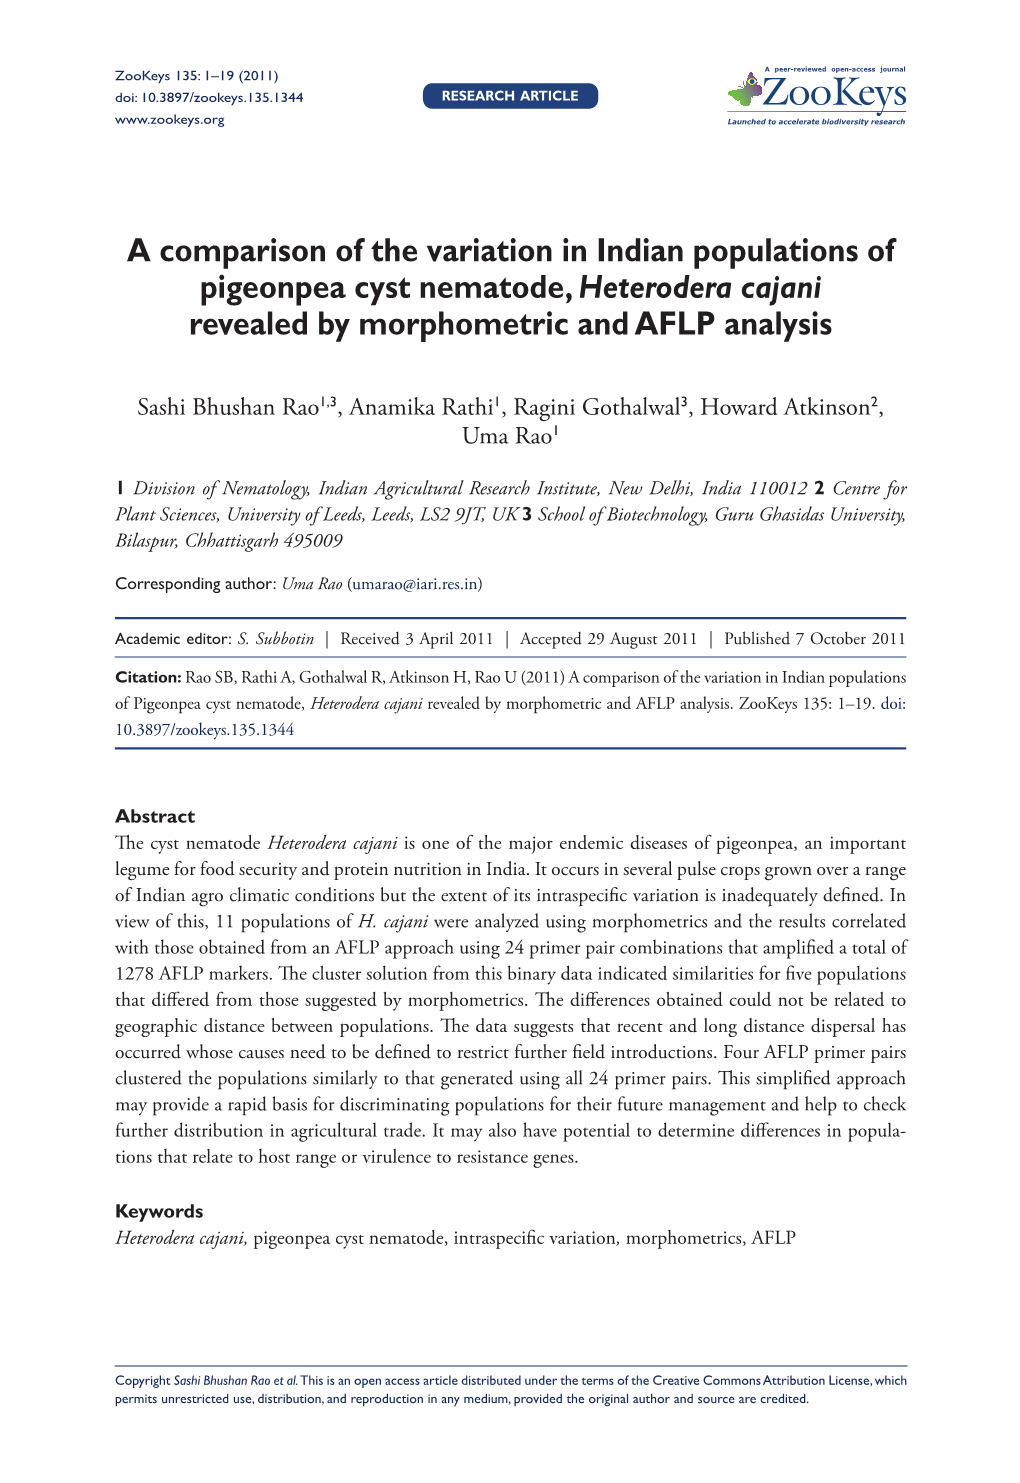 A Comparison of the Variation in Indian Populations of Pigeonpea Cyst Nematode, Heterodera Cajani Revealed by Morphometric and AFLP Analysis